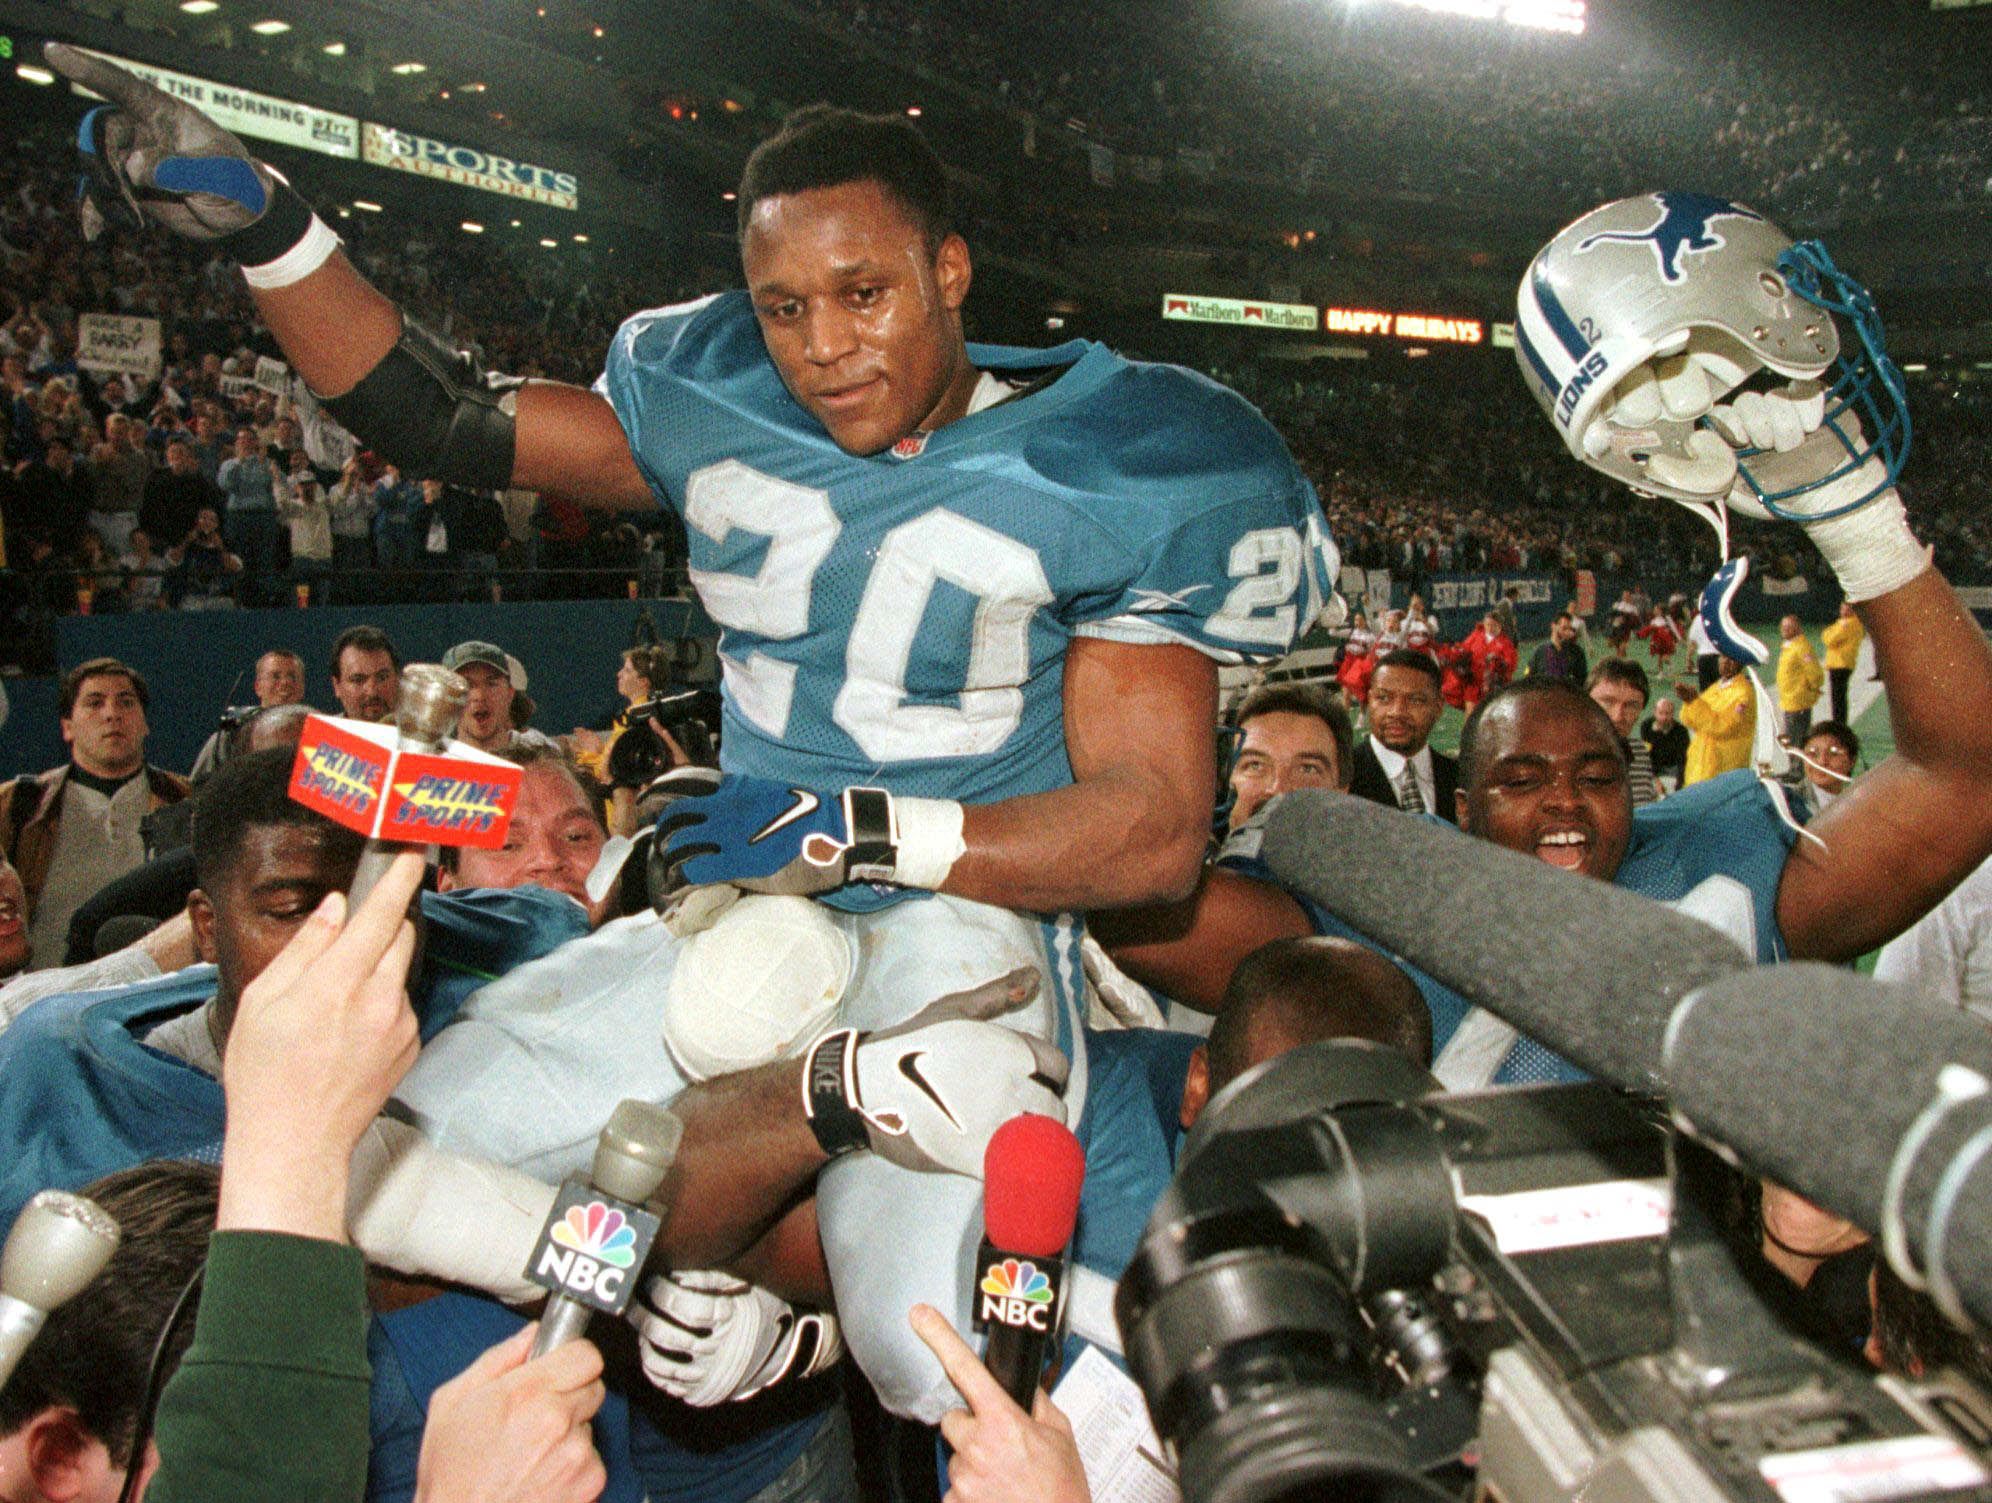 Barry Sanders getting carried off the field